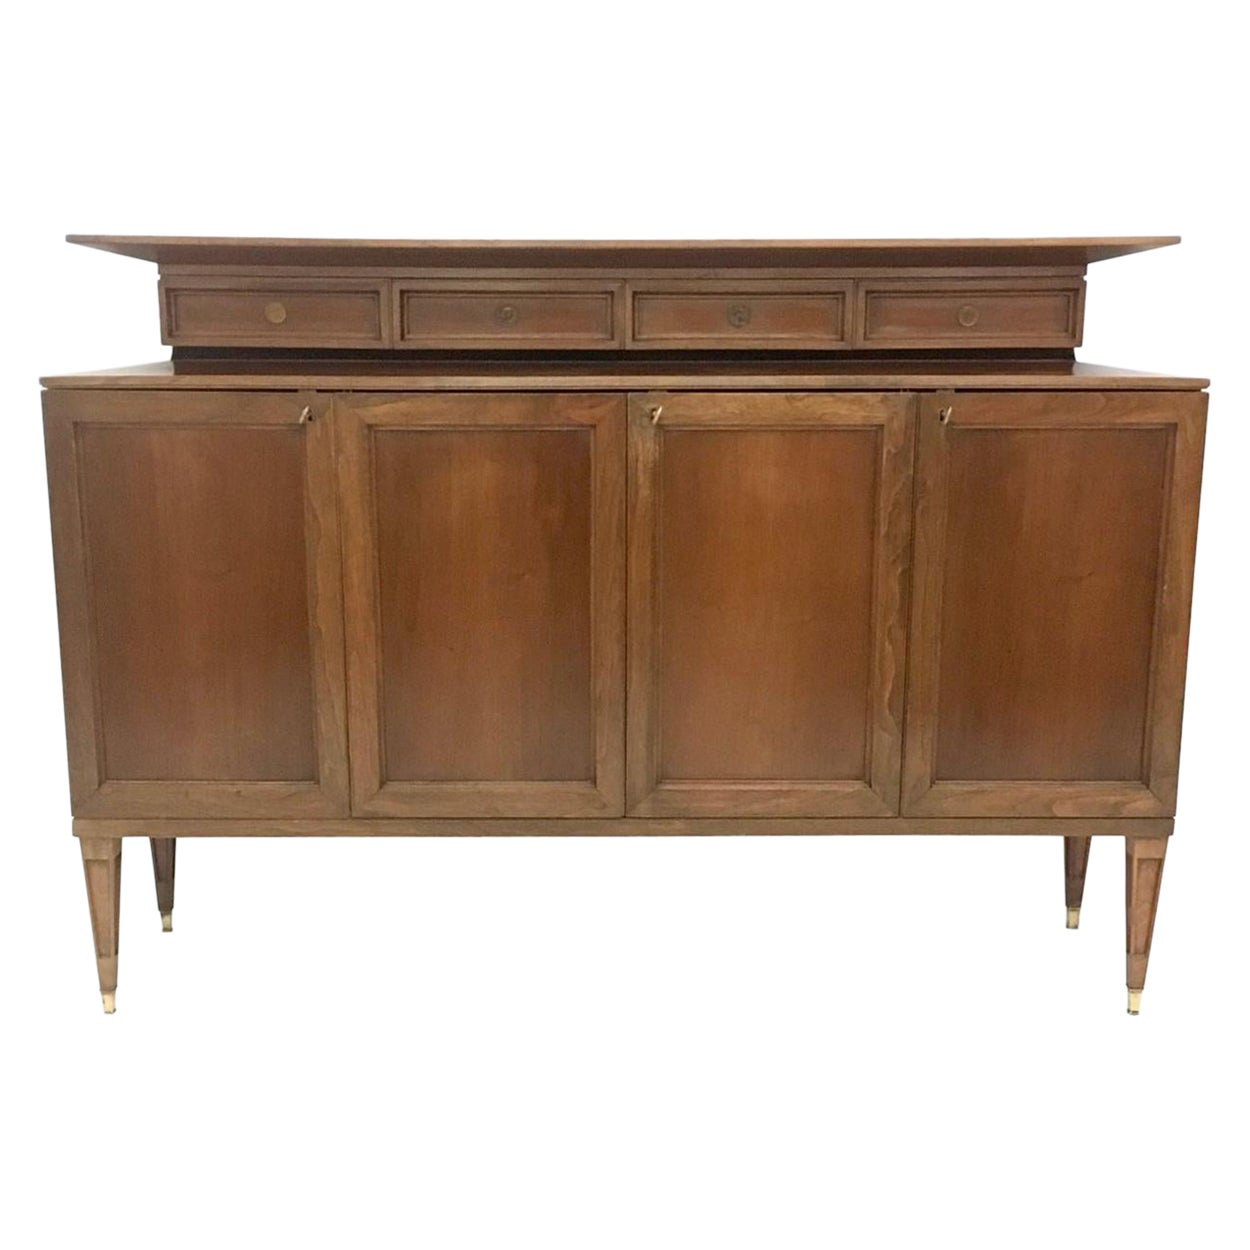 Vintage High-Quality Walnut Cabinet in the Style of Paolo Buffa, Italy